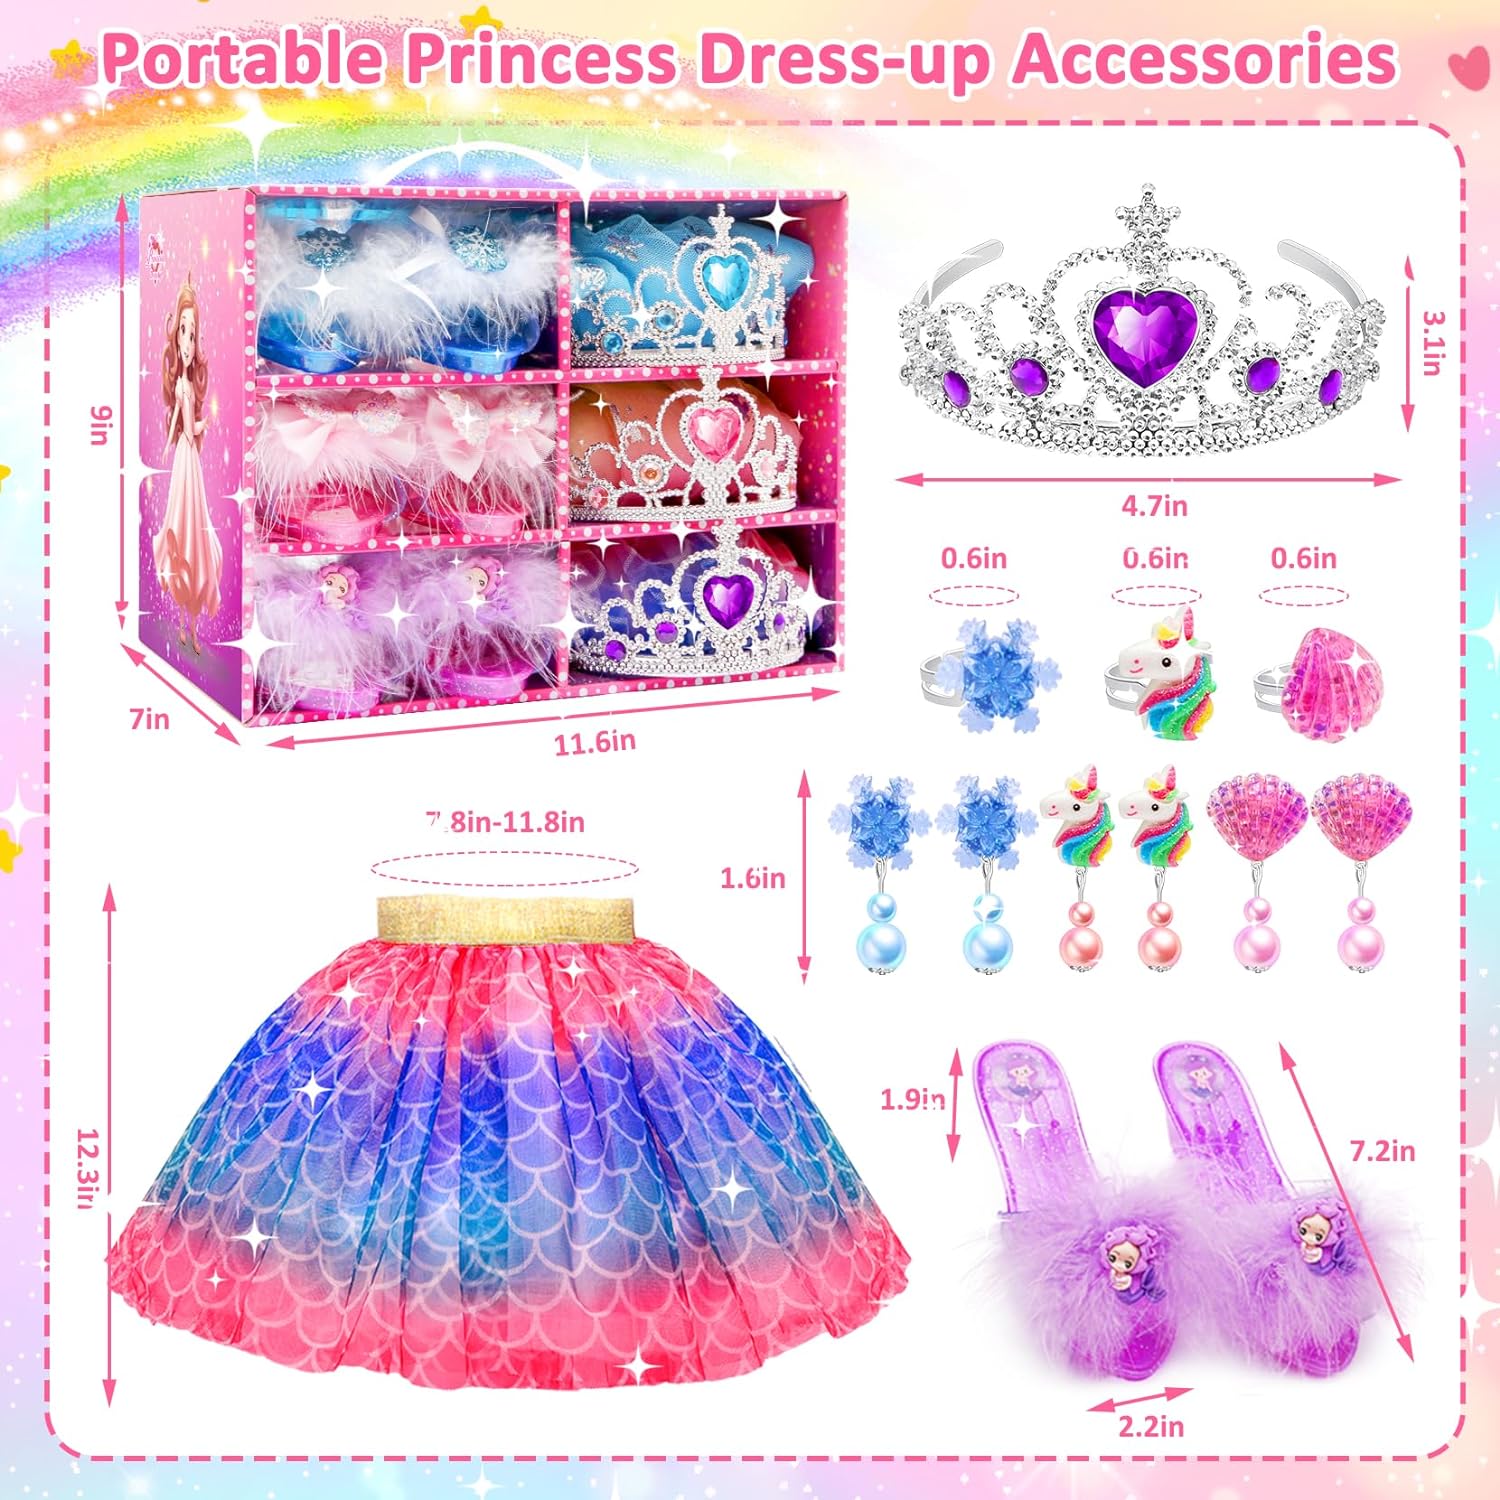 Toys for Girls,Princess Dresses for Girls,Unicorns Gifts for Girls,Princess Dress Up Clothes for Little Girls,Skirts,Princess Shoes,Crowns,Jewery,2 3 4 5 6 7 8 Year Old Girls Birthday Christmas Gifts